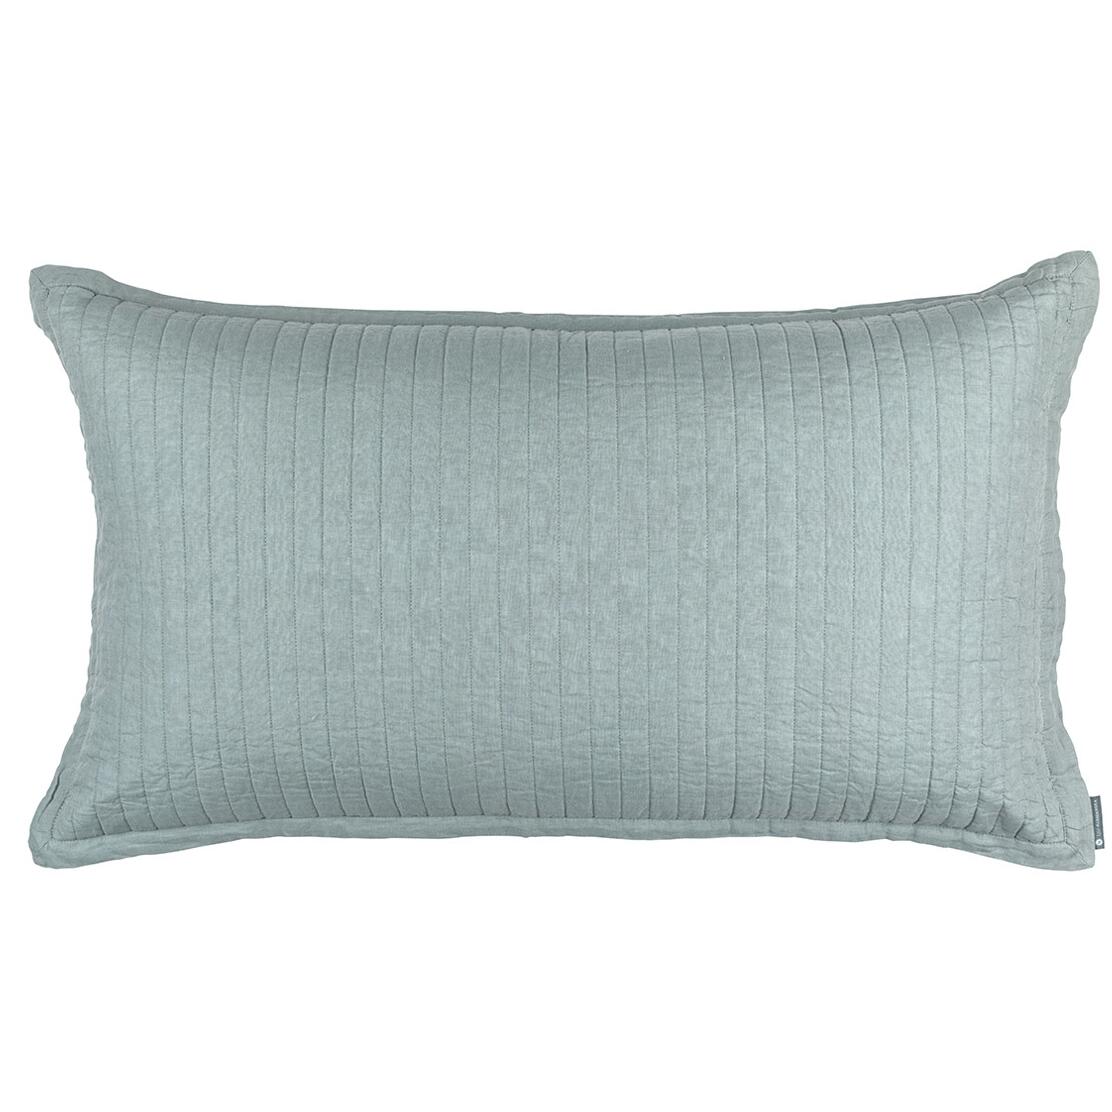 Lili Alessandra Tessa Quilted King Pillows